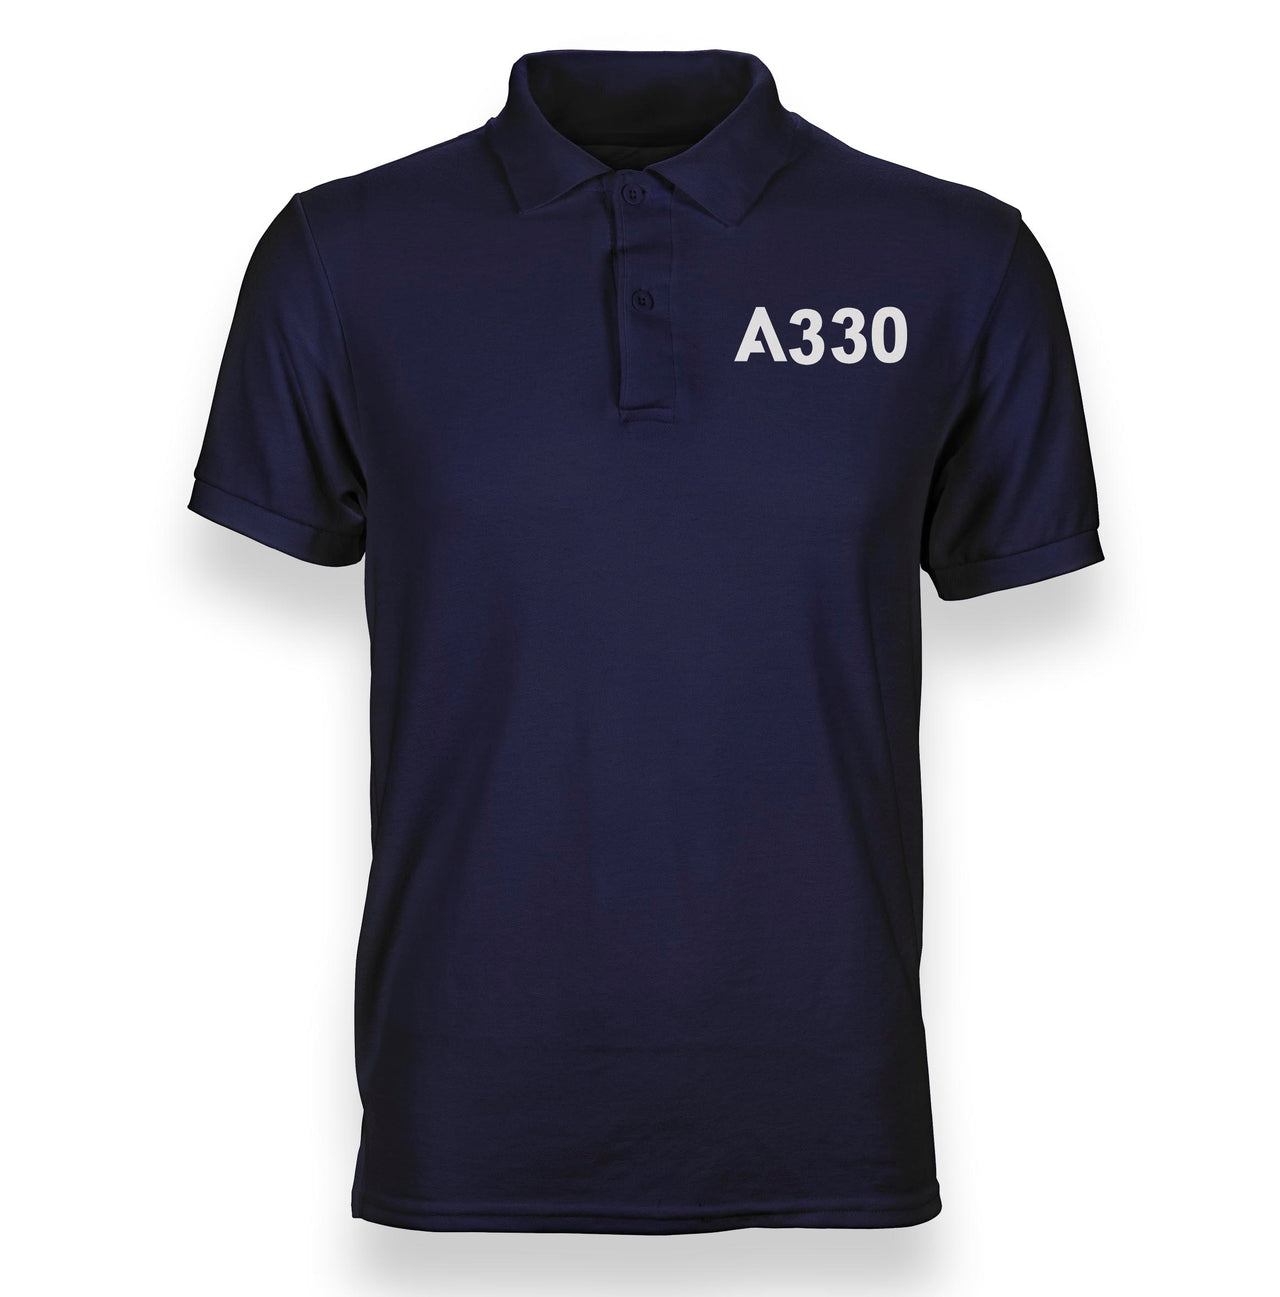 A330 Flat Text Designed Polo T-Shirts